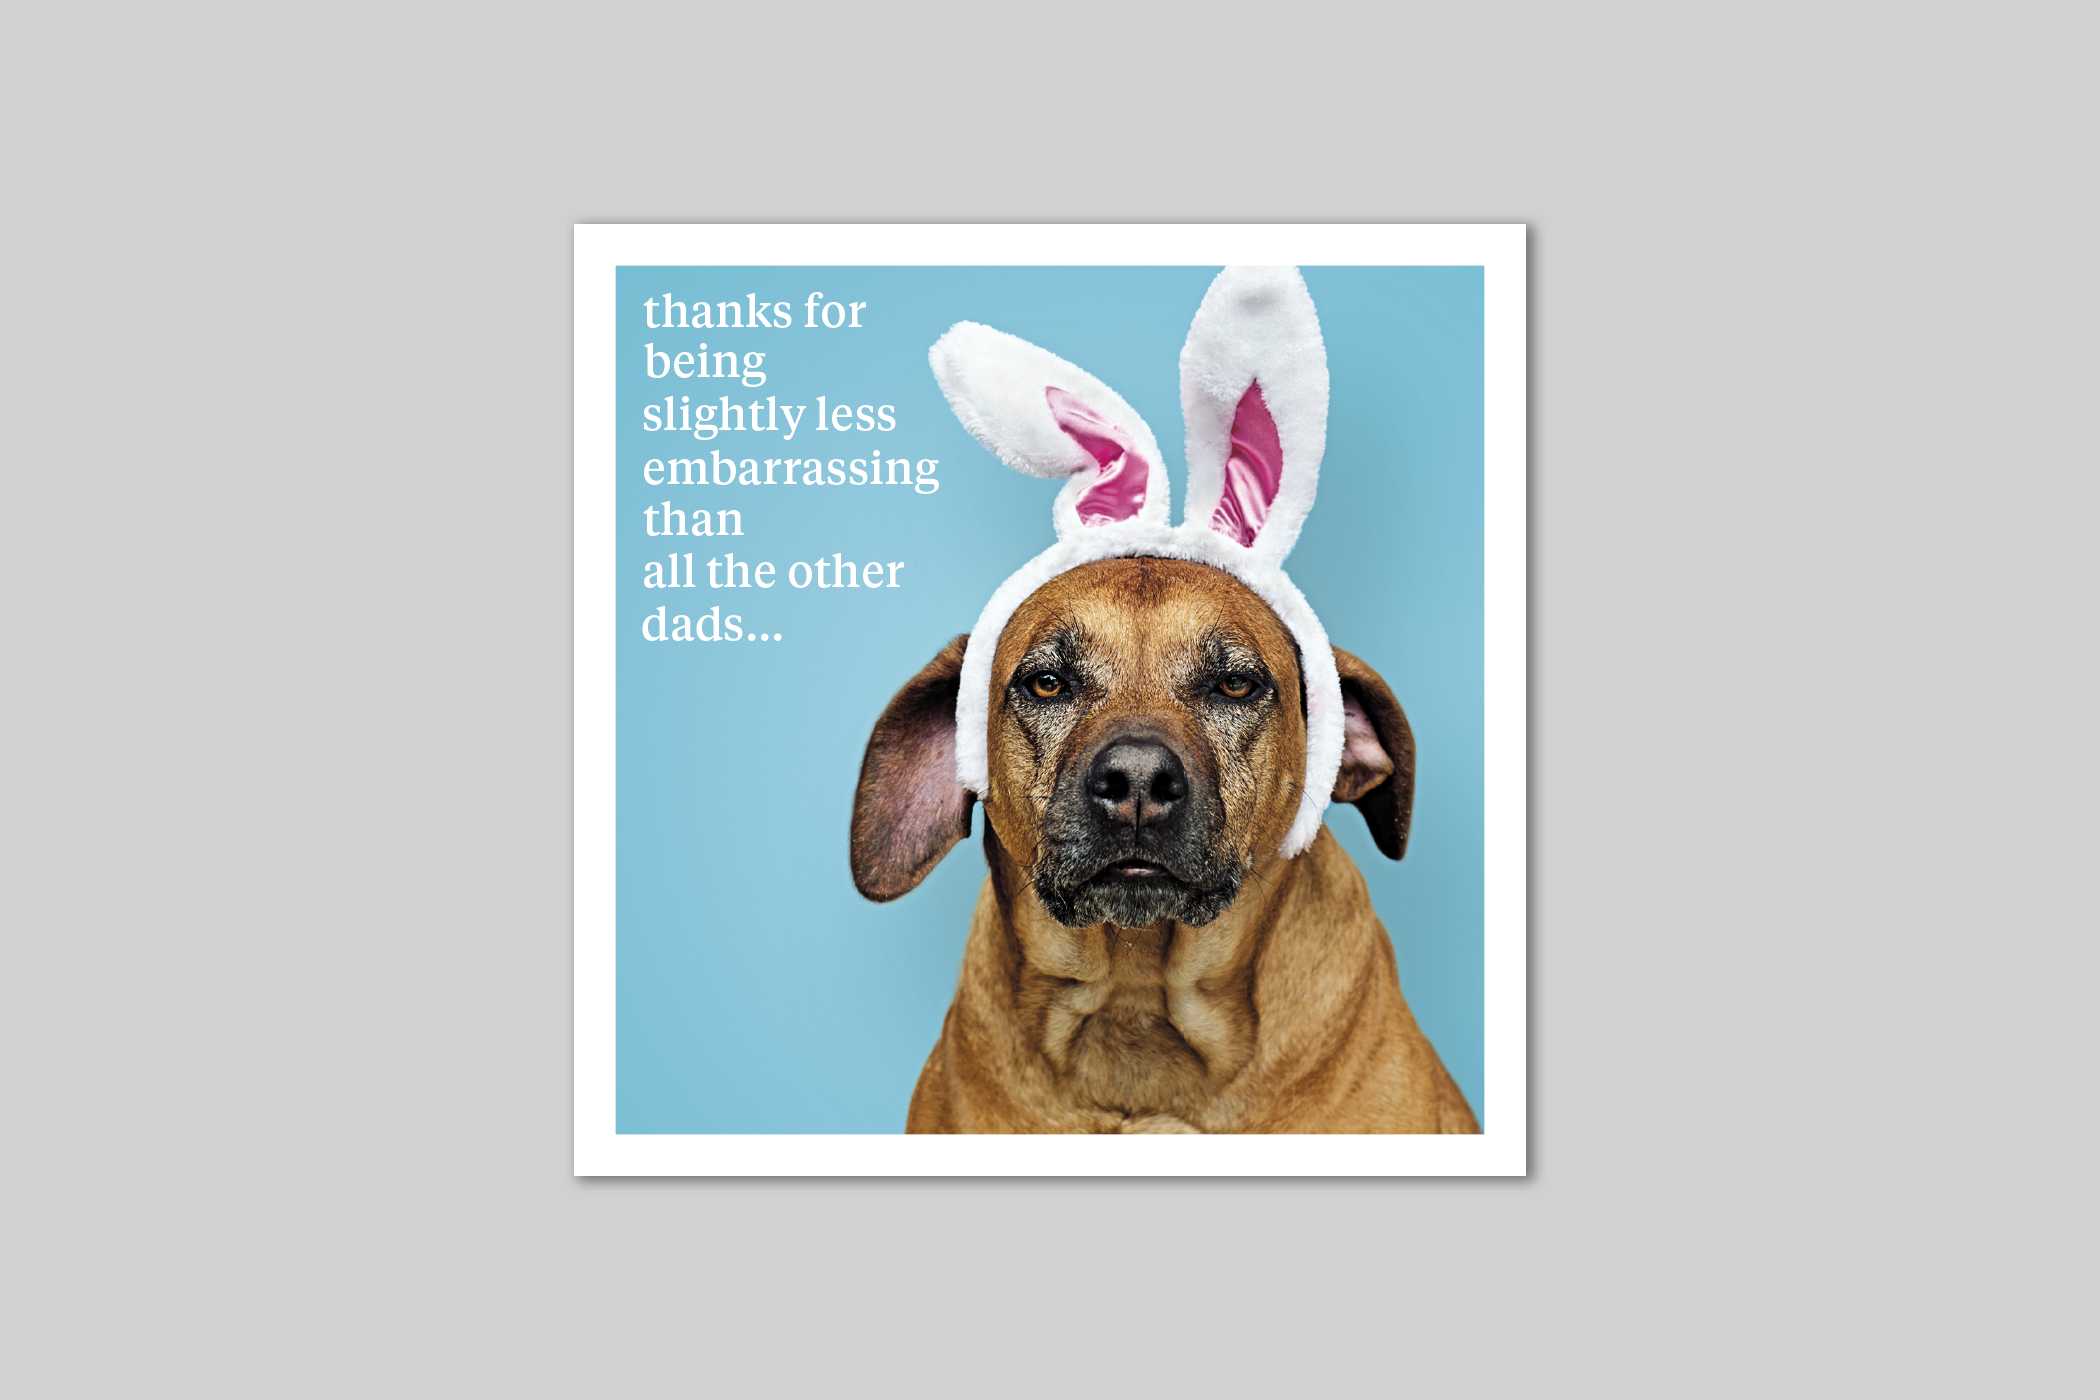 Less Embarrassing dad card quirky animal portrait from Curious World range of greeting cards by Icon.